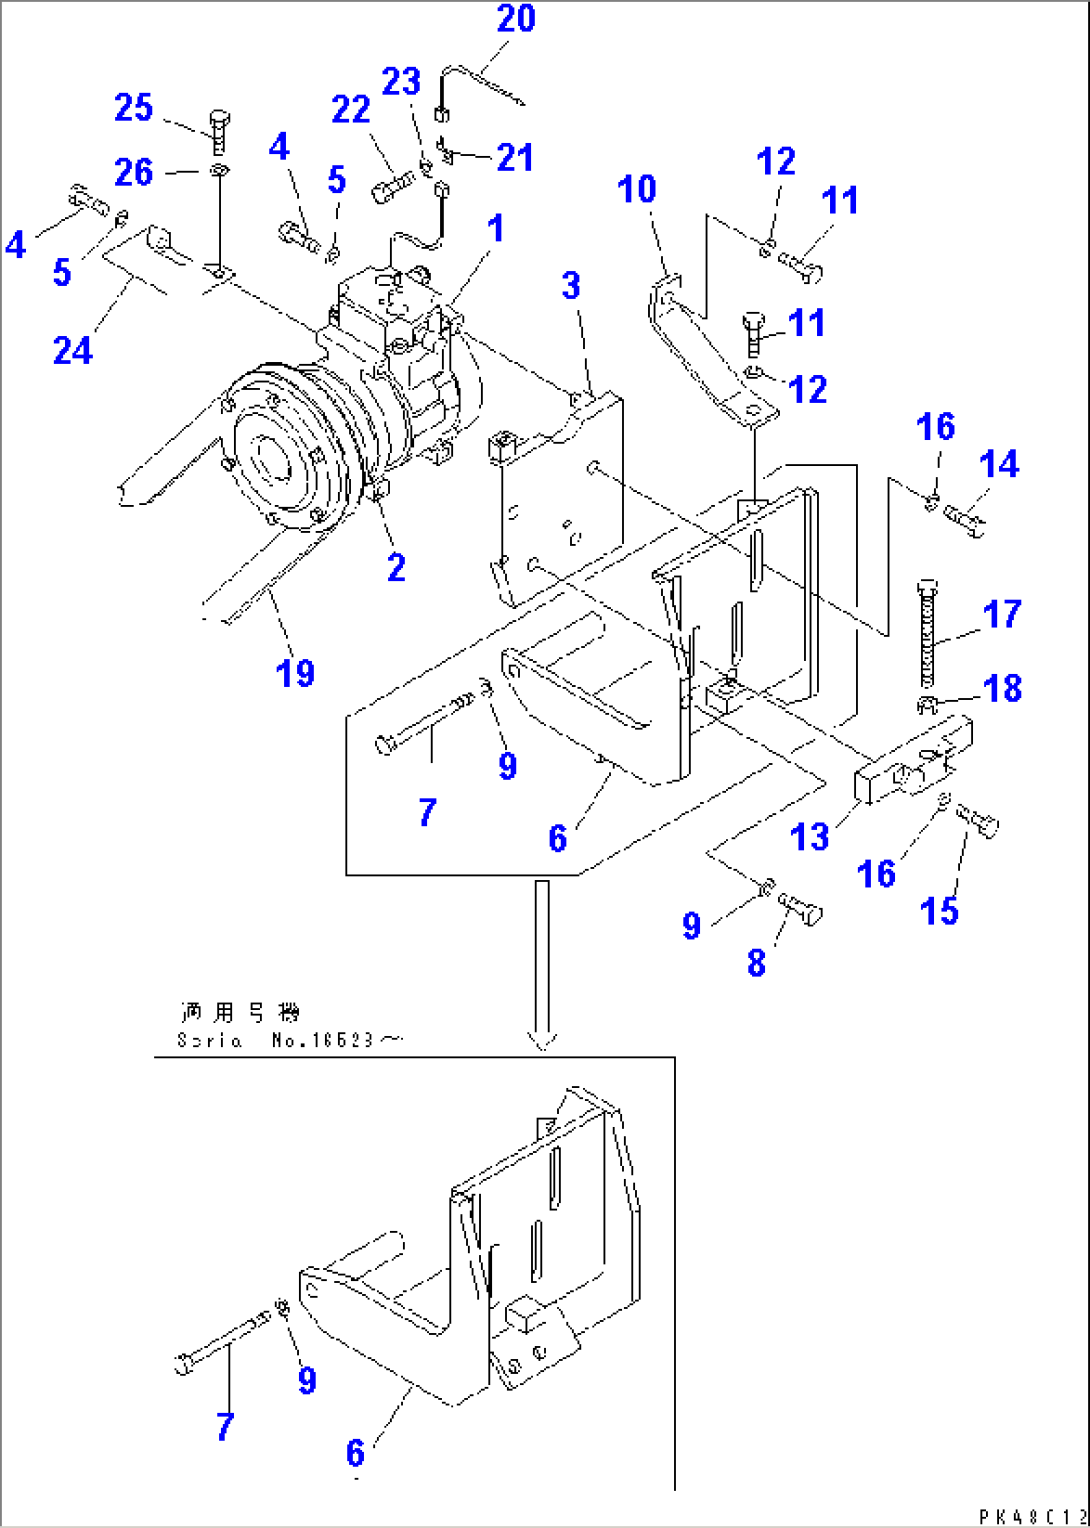 COMPRESSOR AND RELATED PARTS (FOR AIR CONDITIONER)(#16487-)